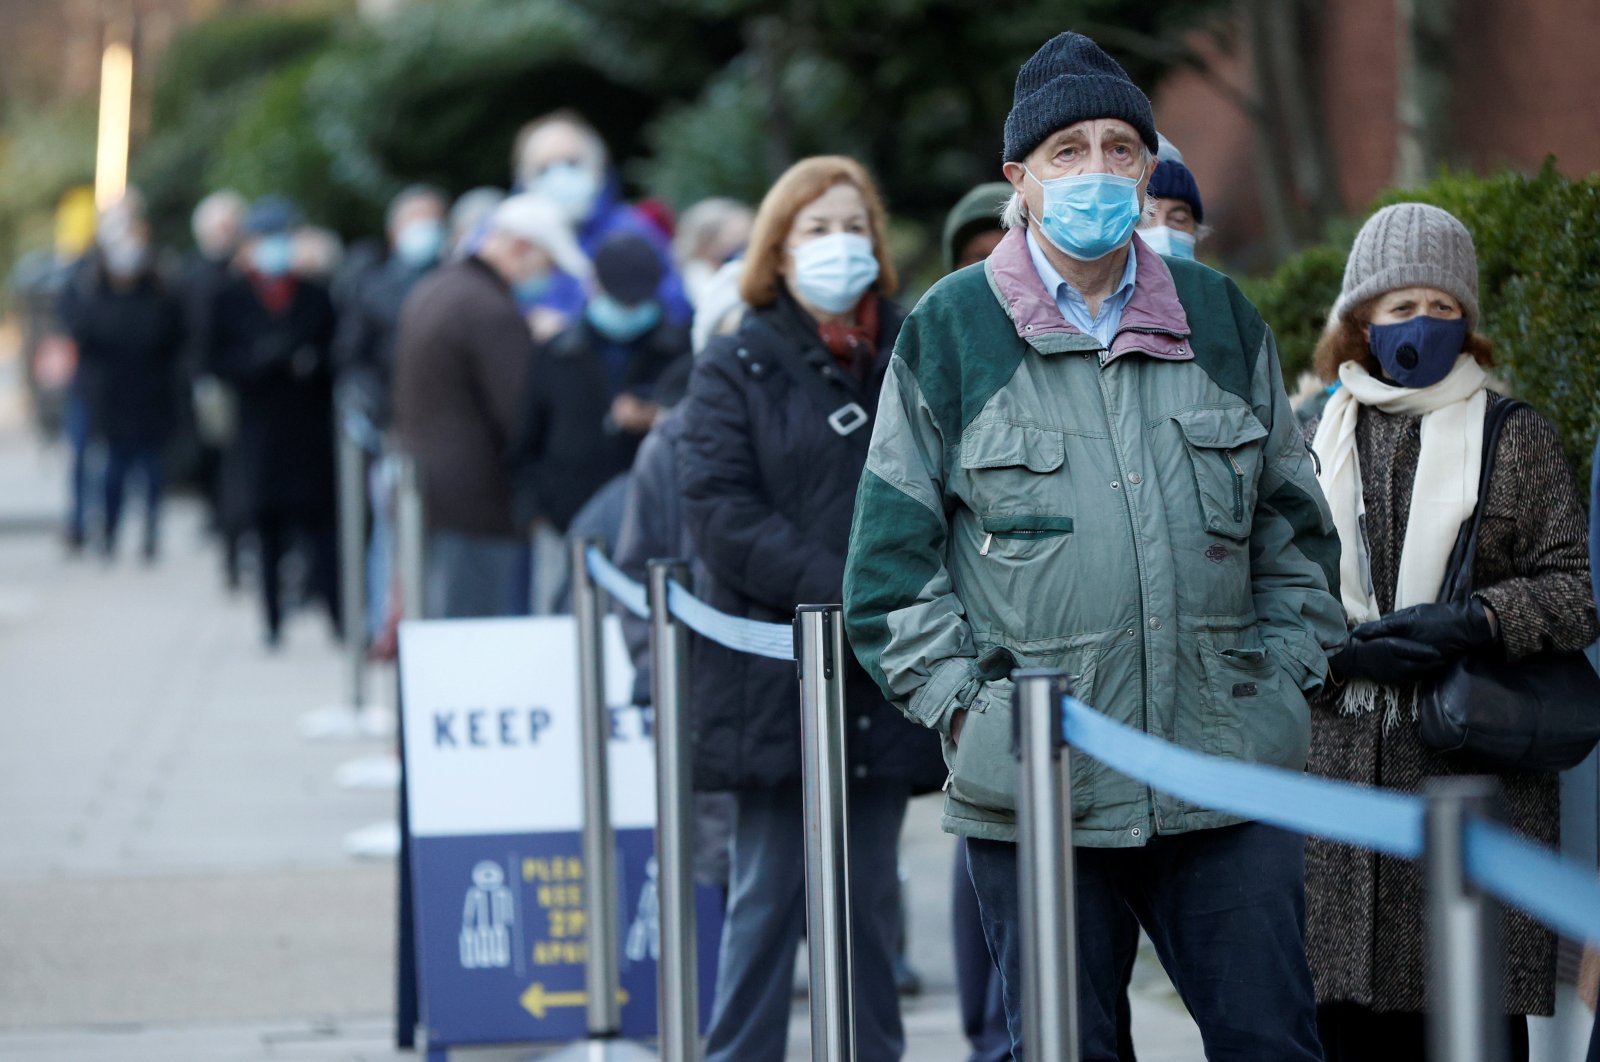 People wait in line to enter Lord's Cricket Ground to receive the coronavirus vaccine, amid the outbreak of coronavirus in London, U.K., Jan. 22, 2021. (Reuters Photo)